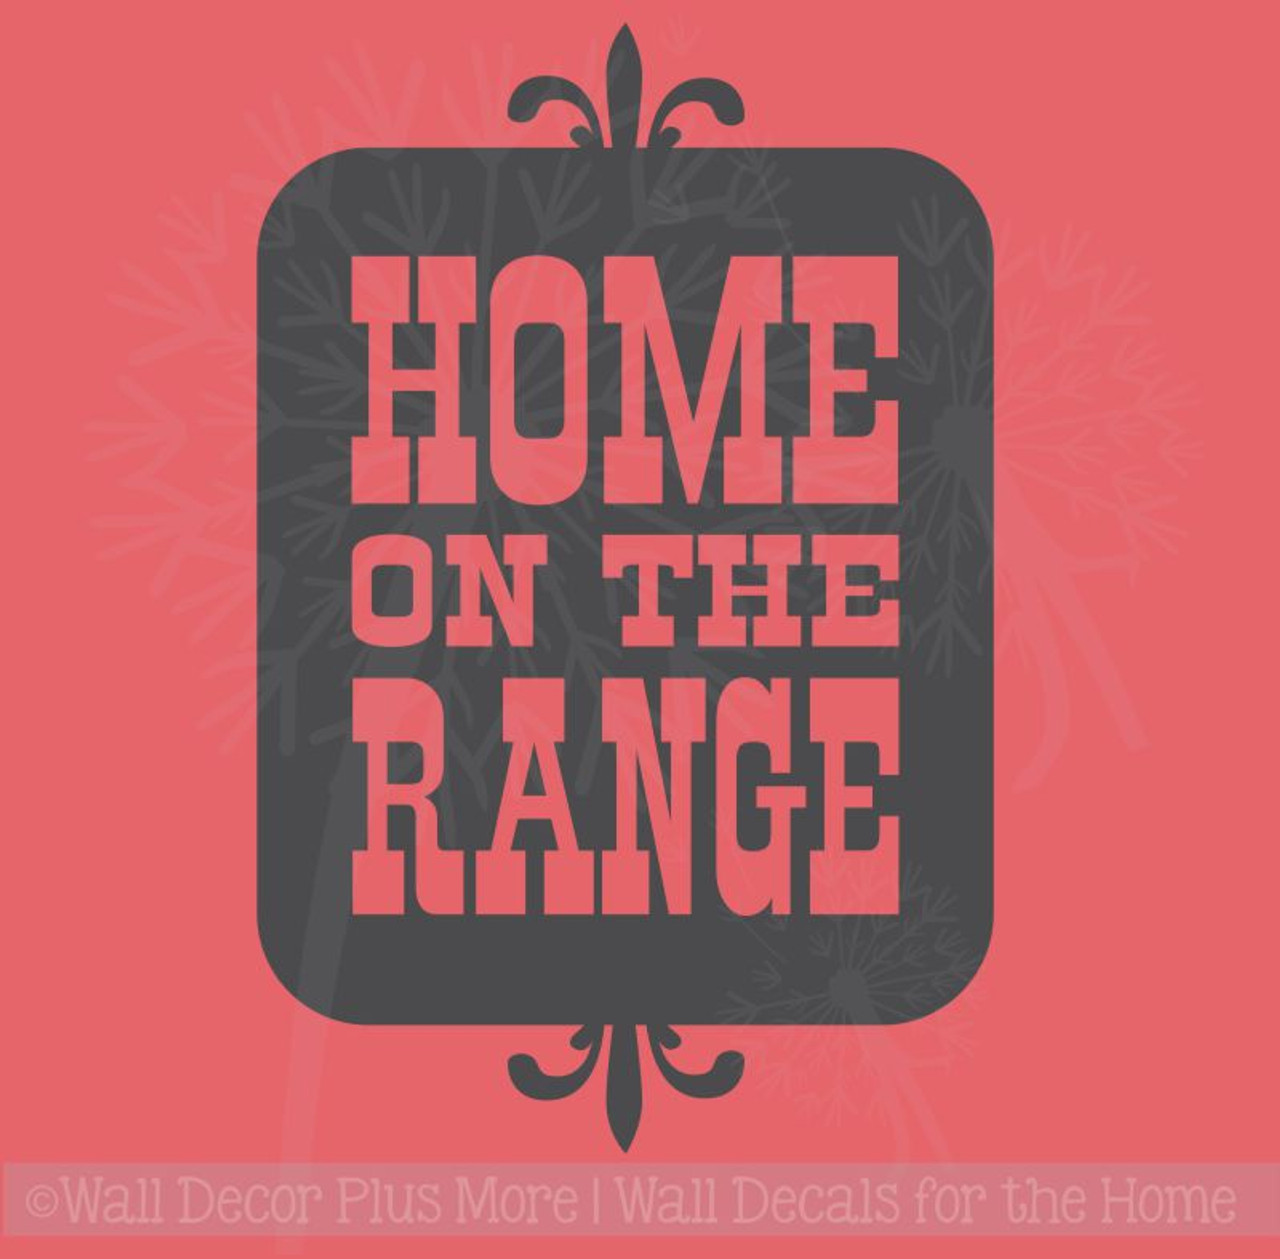 Home on the Range Vinyl Letters Art Western Wall Decals Sticker Quotes